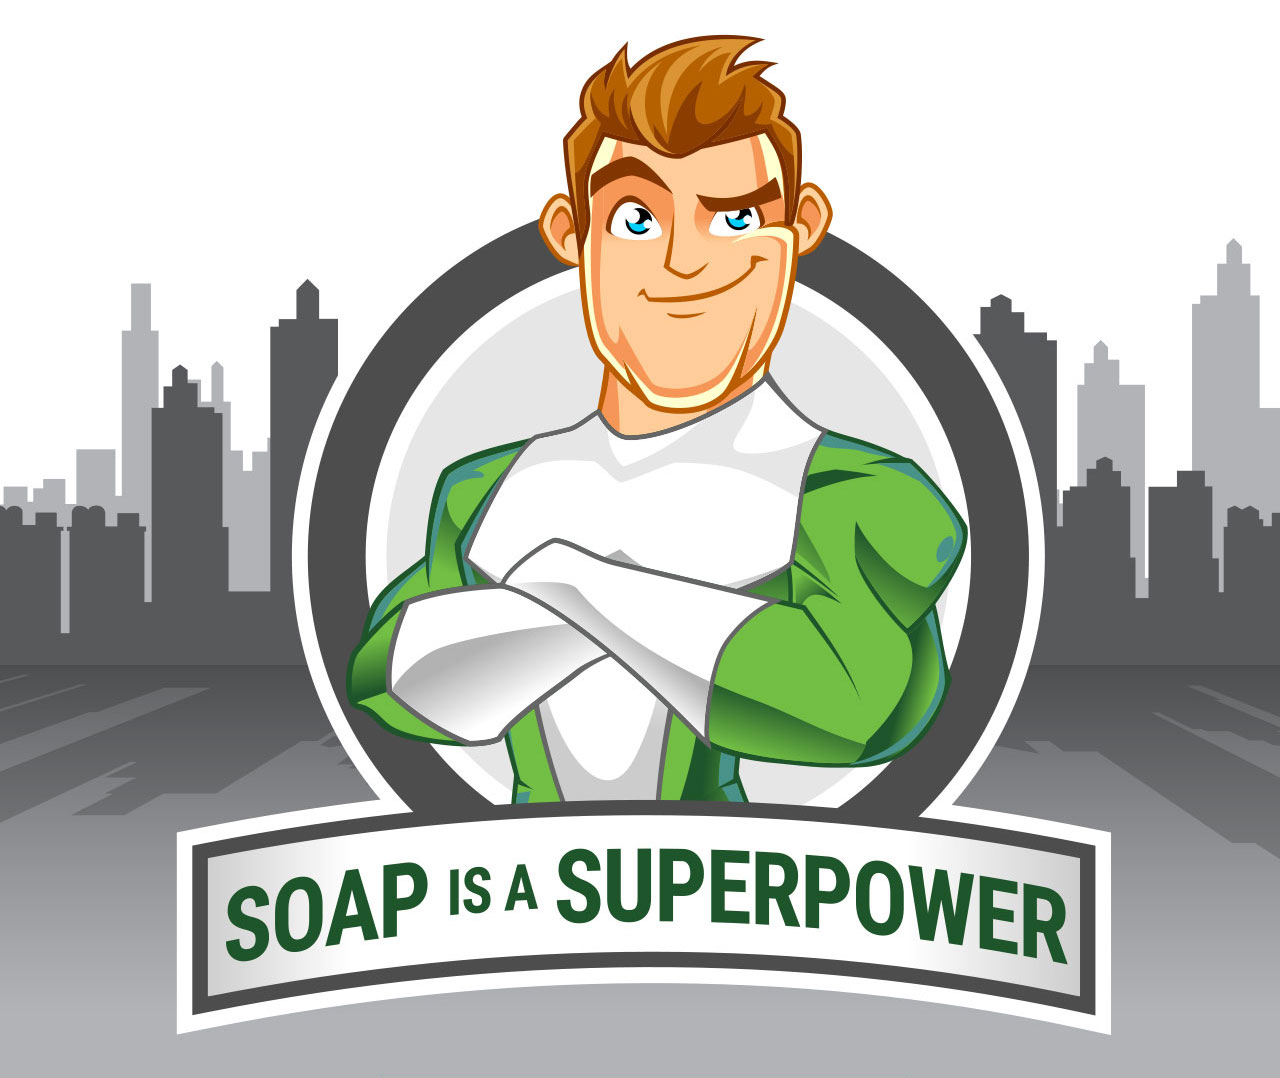 Soap is a Superpower - Ver-tech Labs